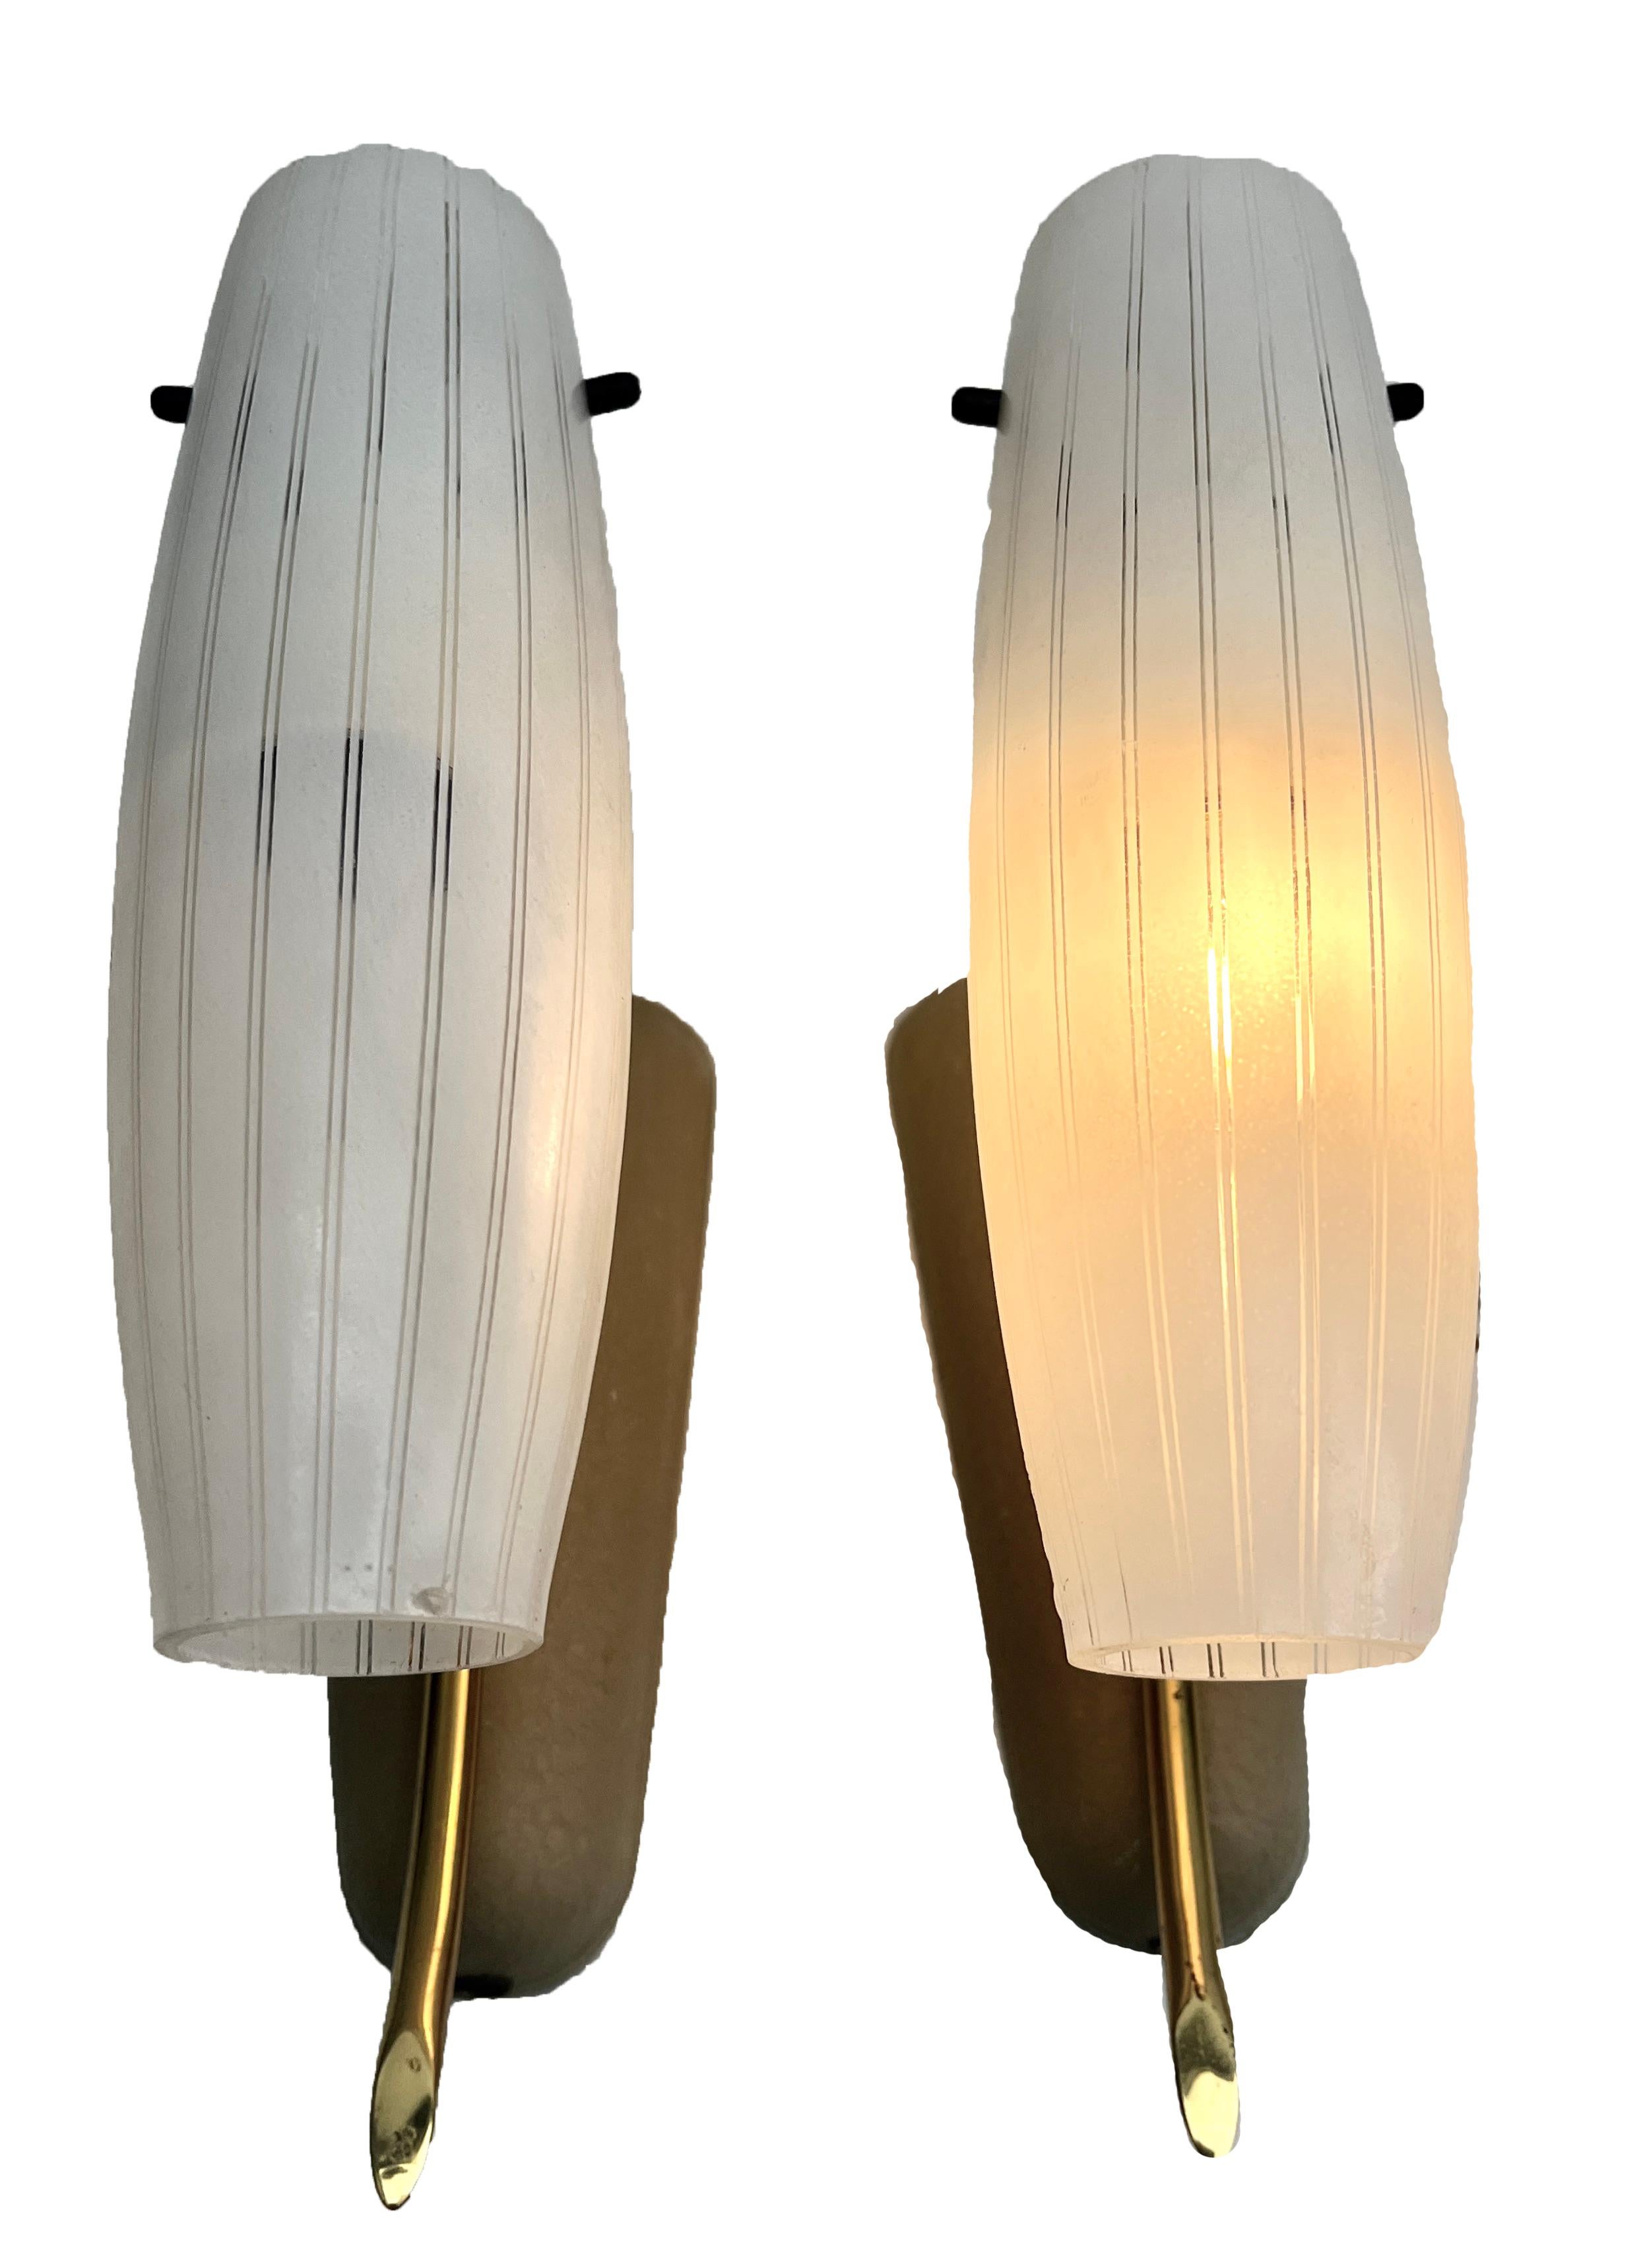 Mid-Century Modern Vintage Pair of 1 Arm Wall Mount Lamps in the Style of Stilnovo, Italian, 1960s For Sale